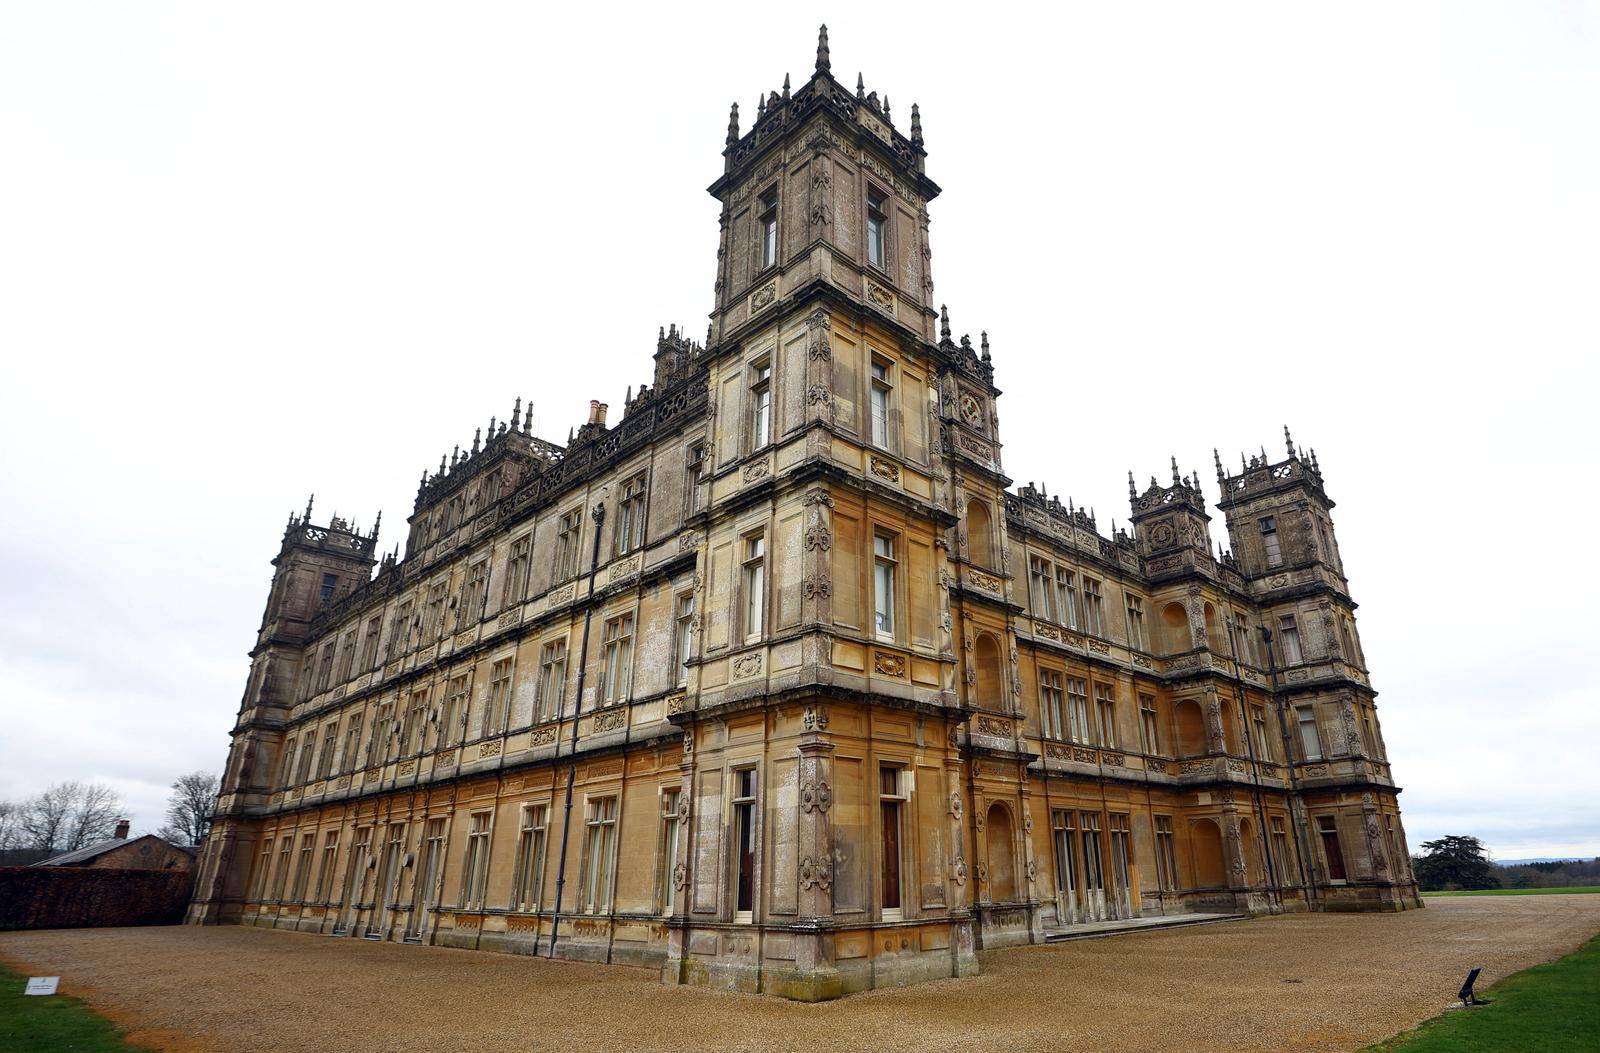 Downton Abbey castle struggles to find staff blaming Brexit